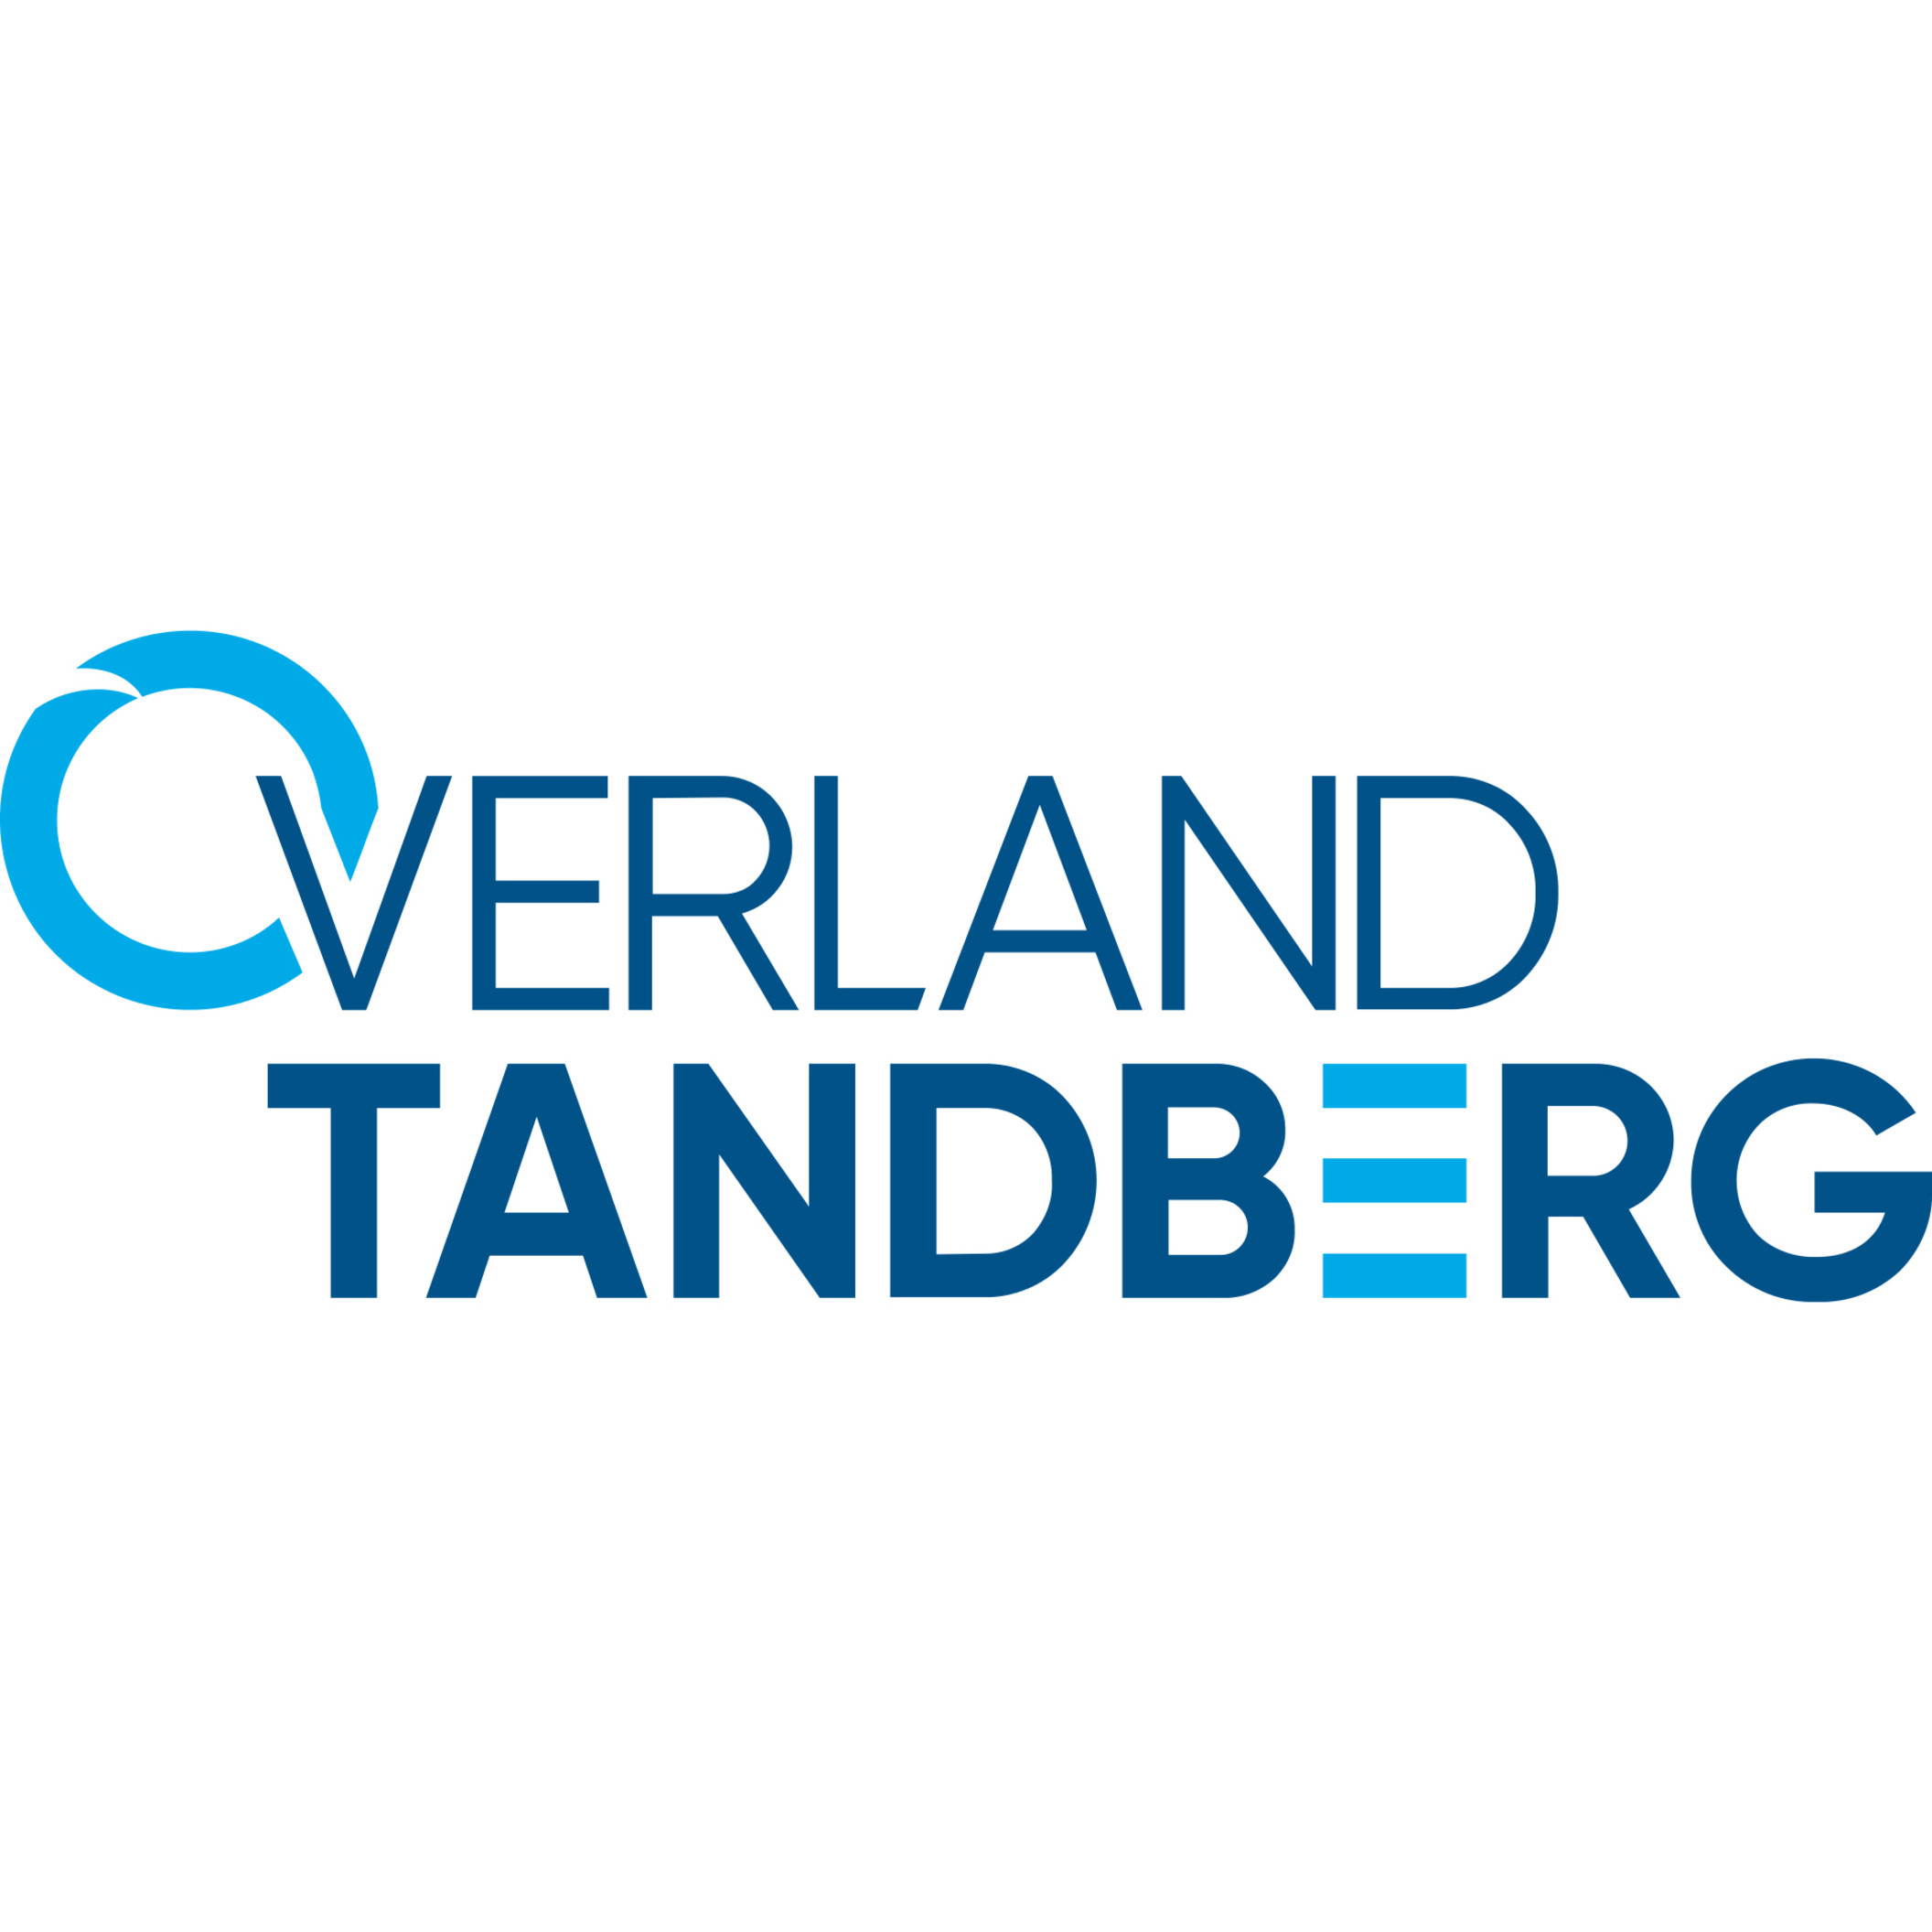 Overland -Tandberg LTO-8 Data Cartridge, 12.0/30.0TB, Un-labeled with CaseLTO-812 TB (Native) / 30 TB (Compressed)3149.61 ft Tape Length… 434132